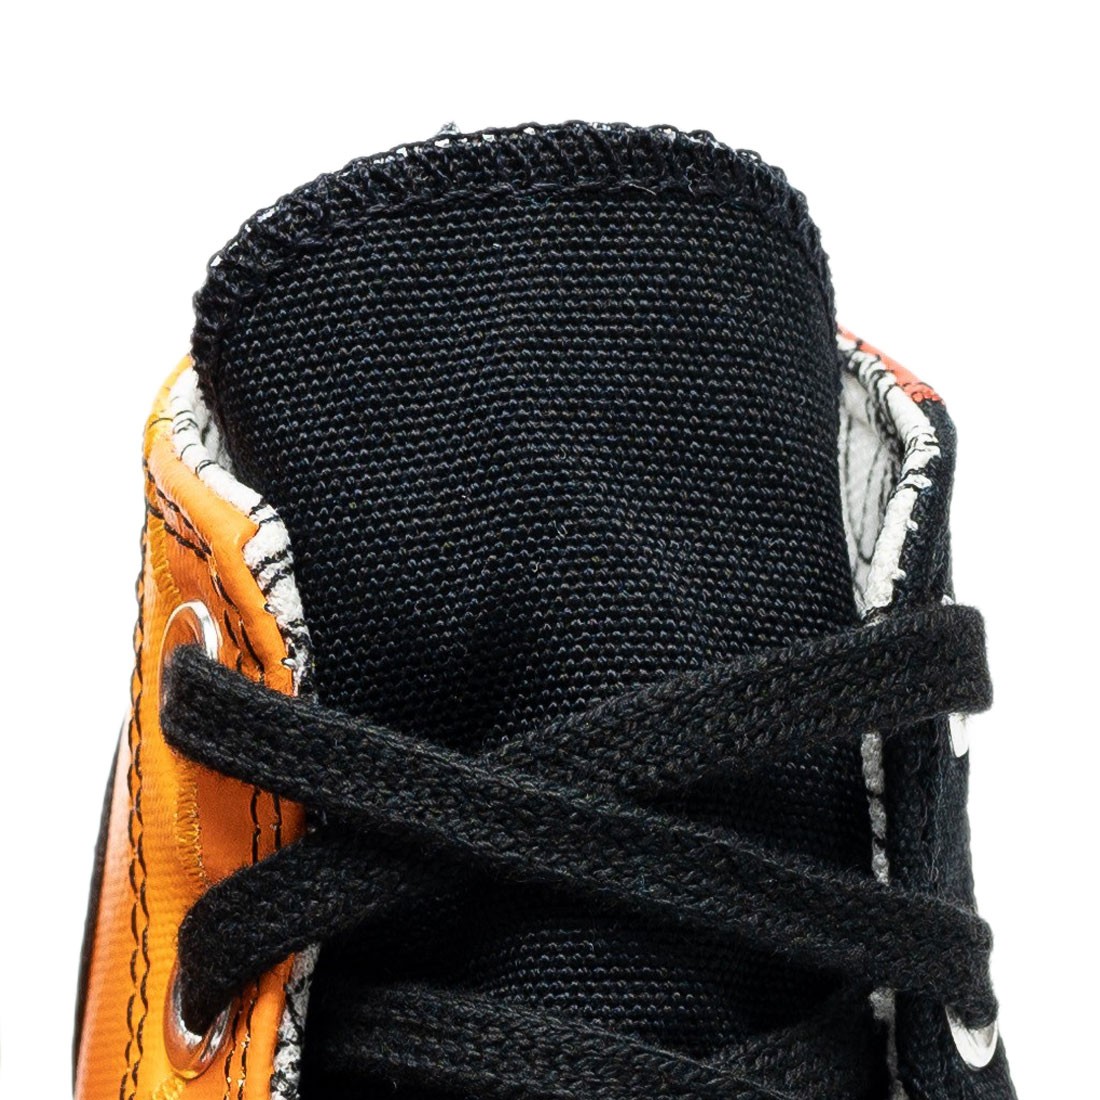 which is highlighted with the Converse Thunderbolt 84